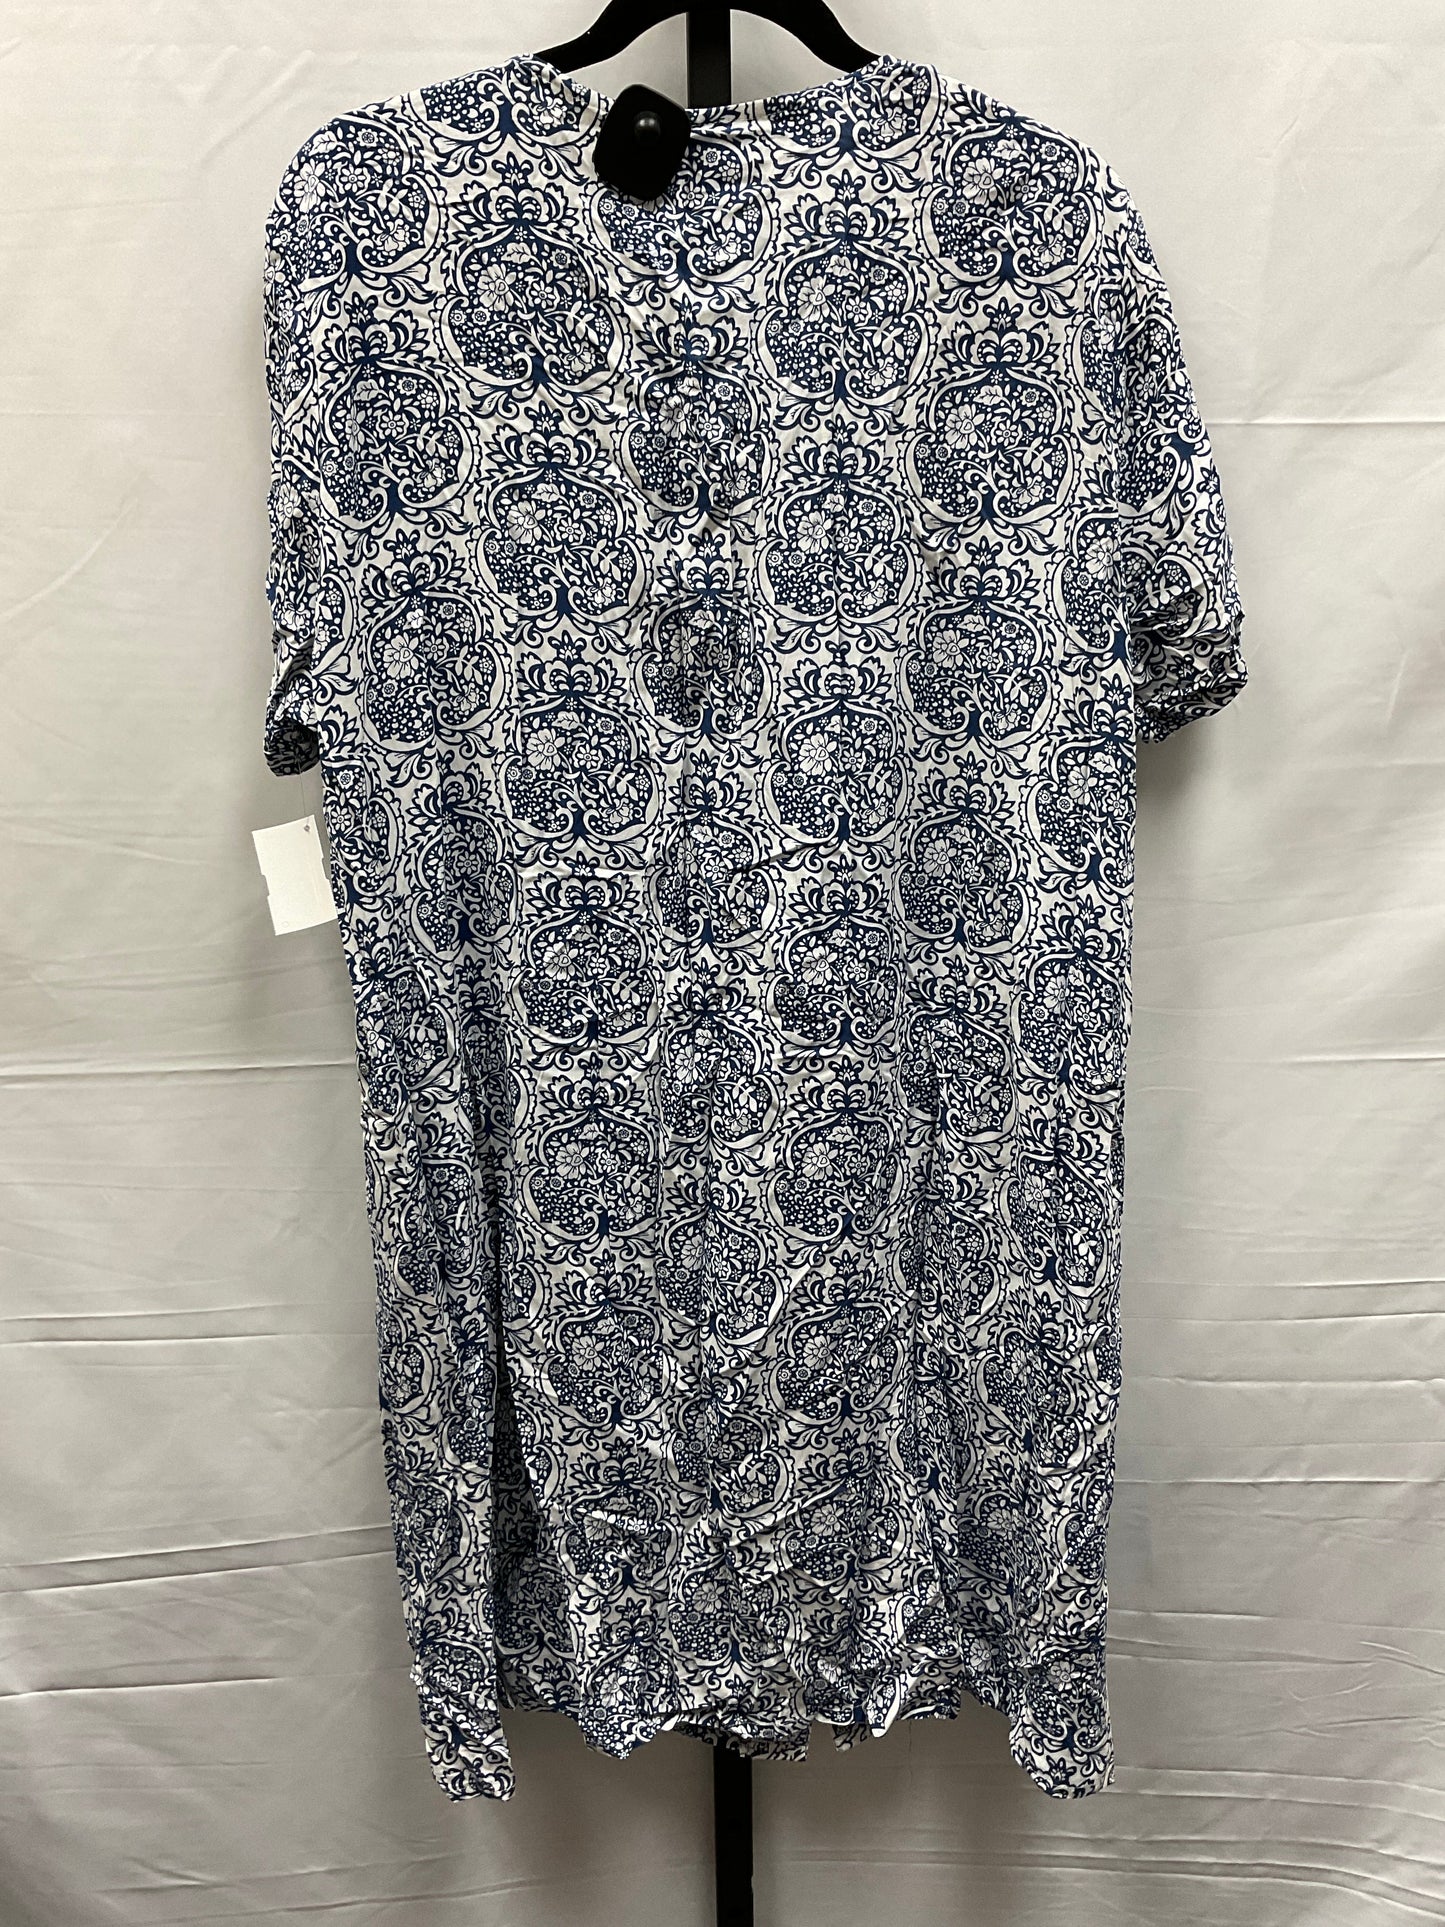 Blue & White Dress Casual Short Clothes Mentor, Size Xxl